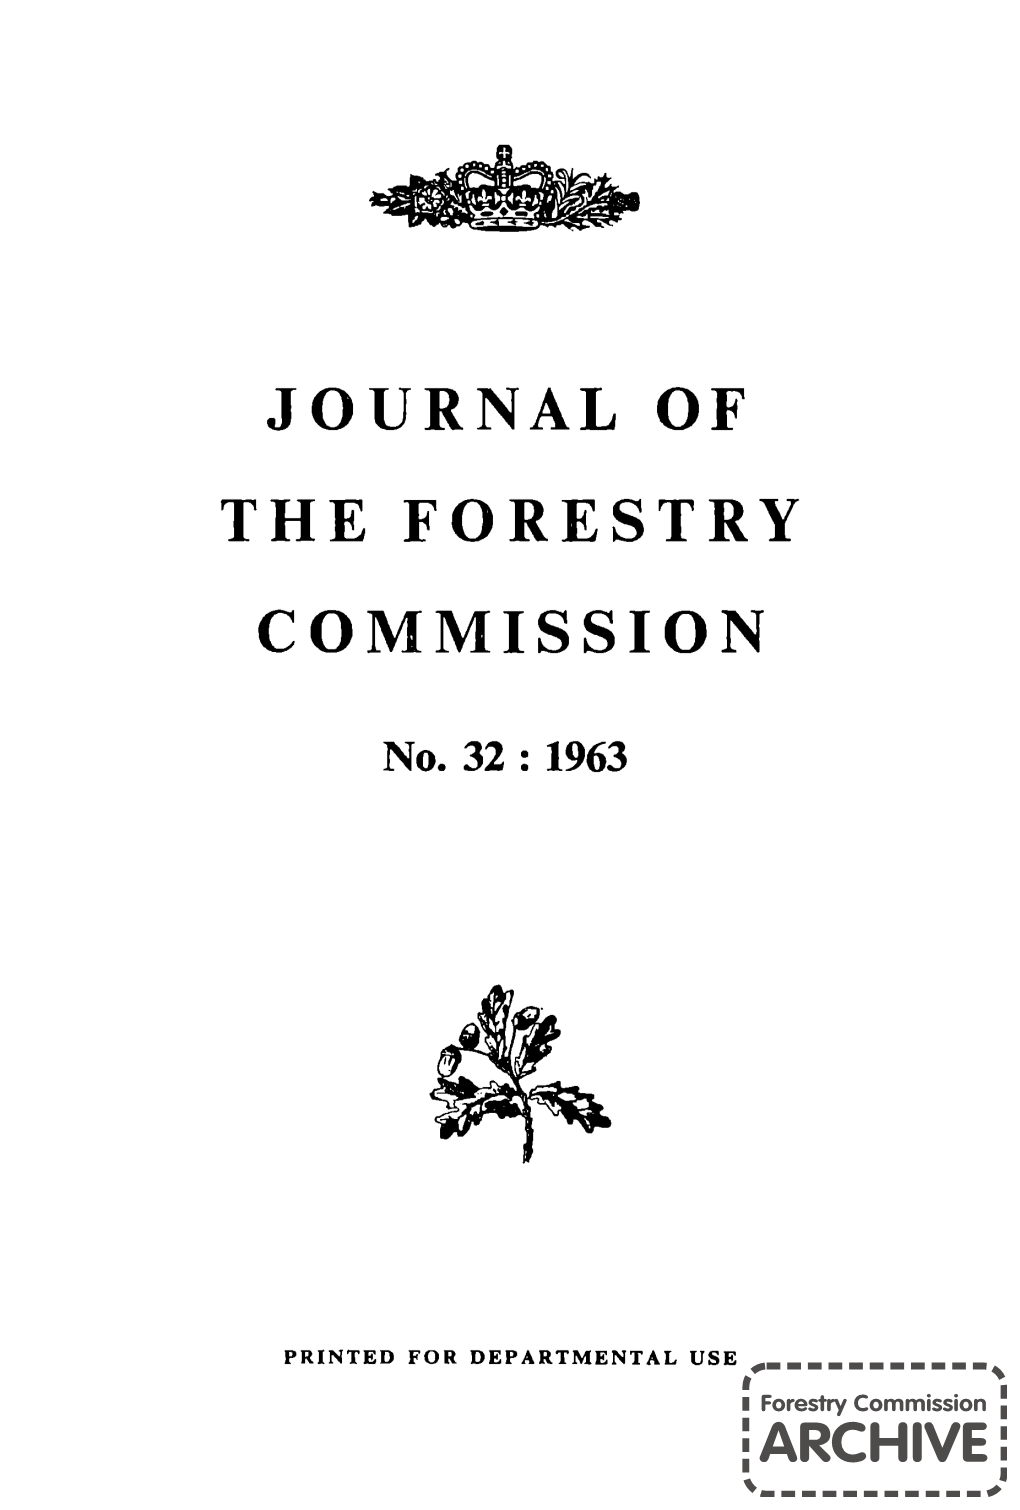 Forestry Commission Journal, No